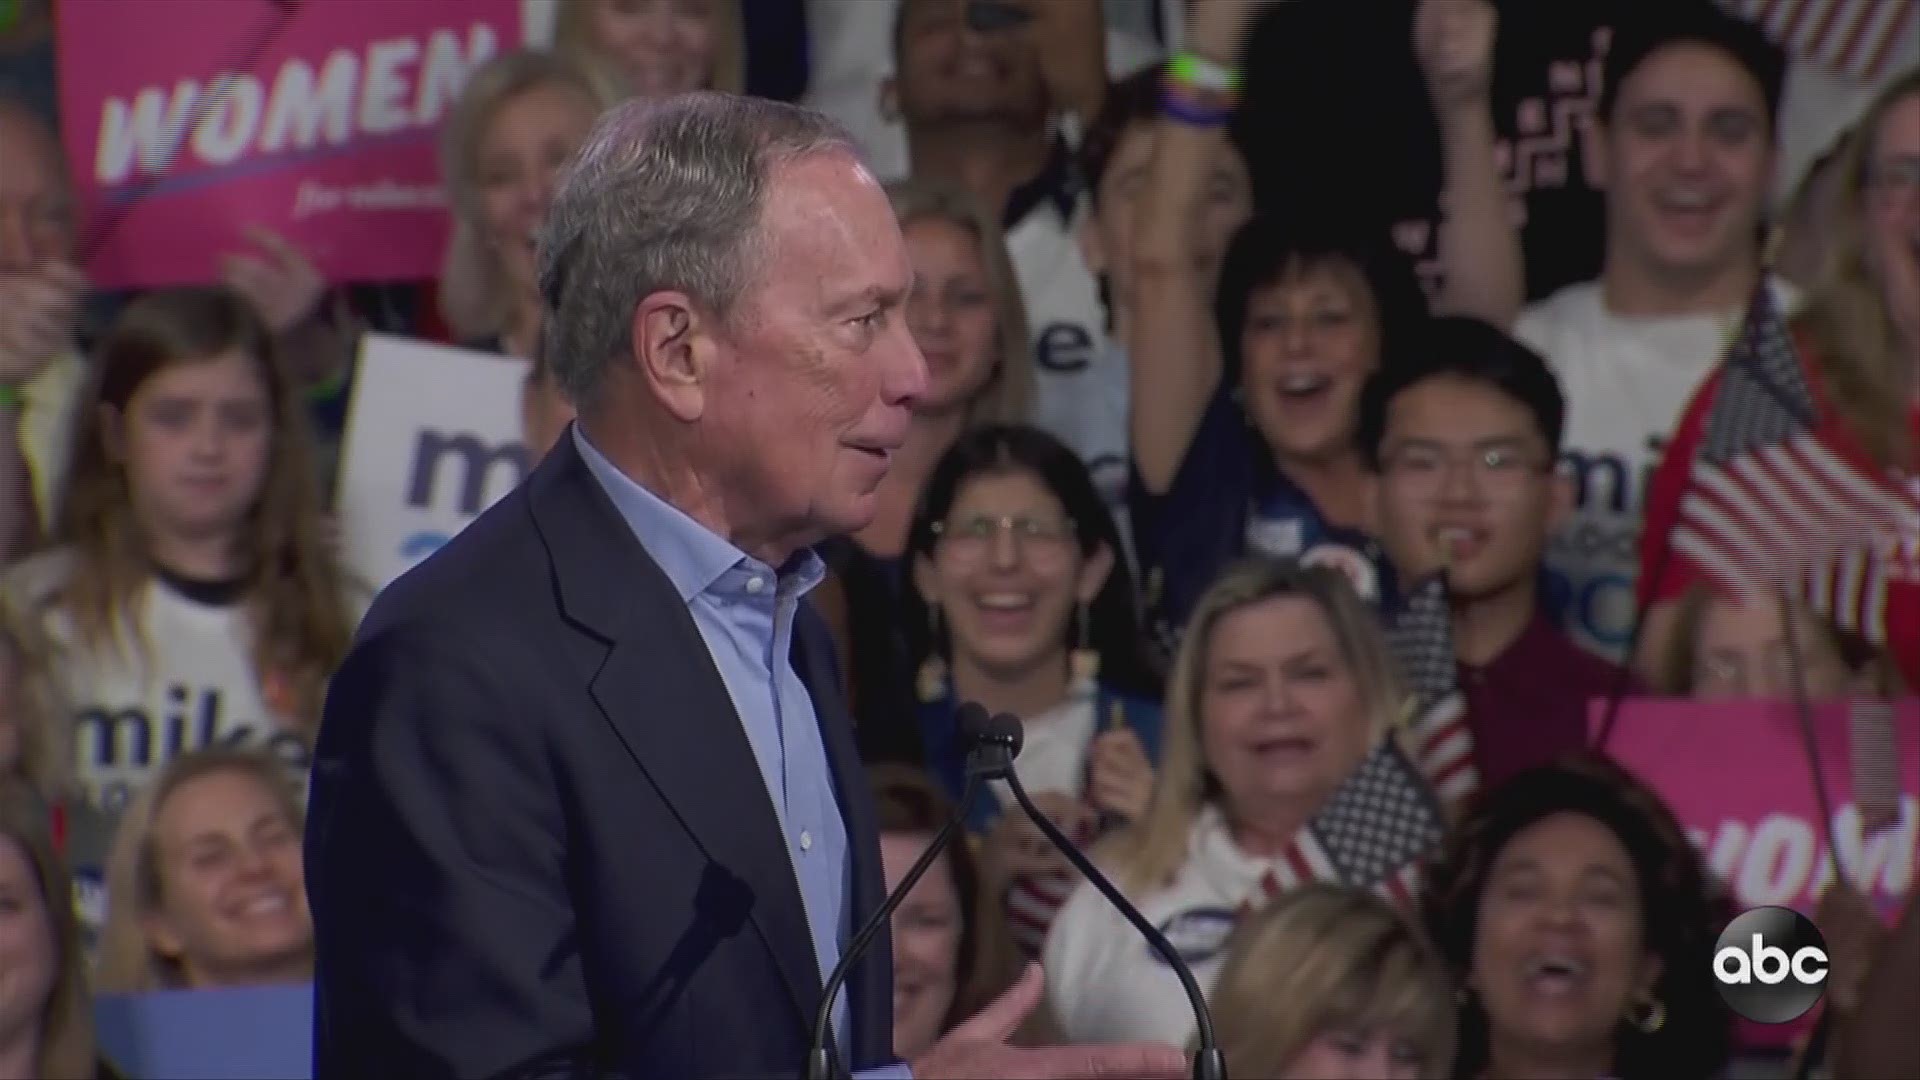 Democratic presidential hopeful Michael Bloomberg talked to his supporters at Florida rally Tuesday night as polls were closing and votes were tallied.